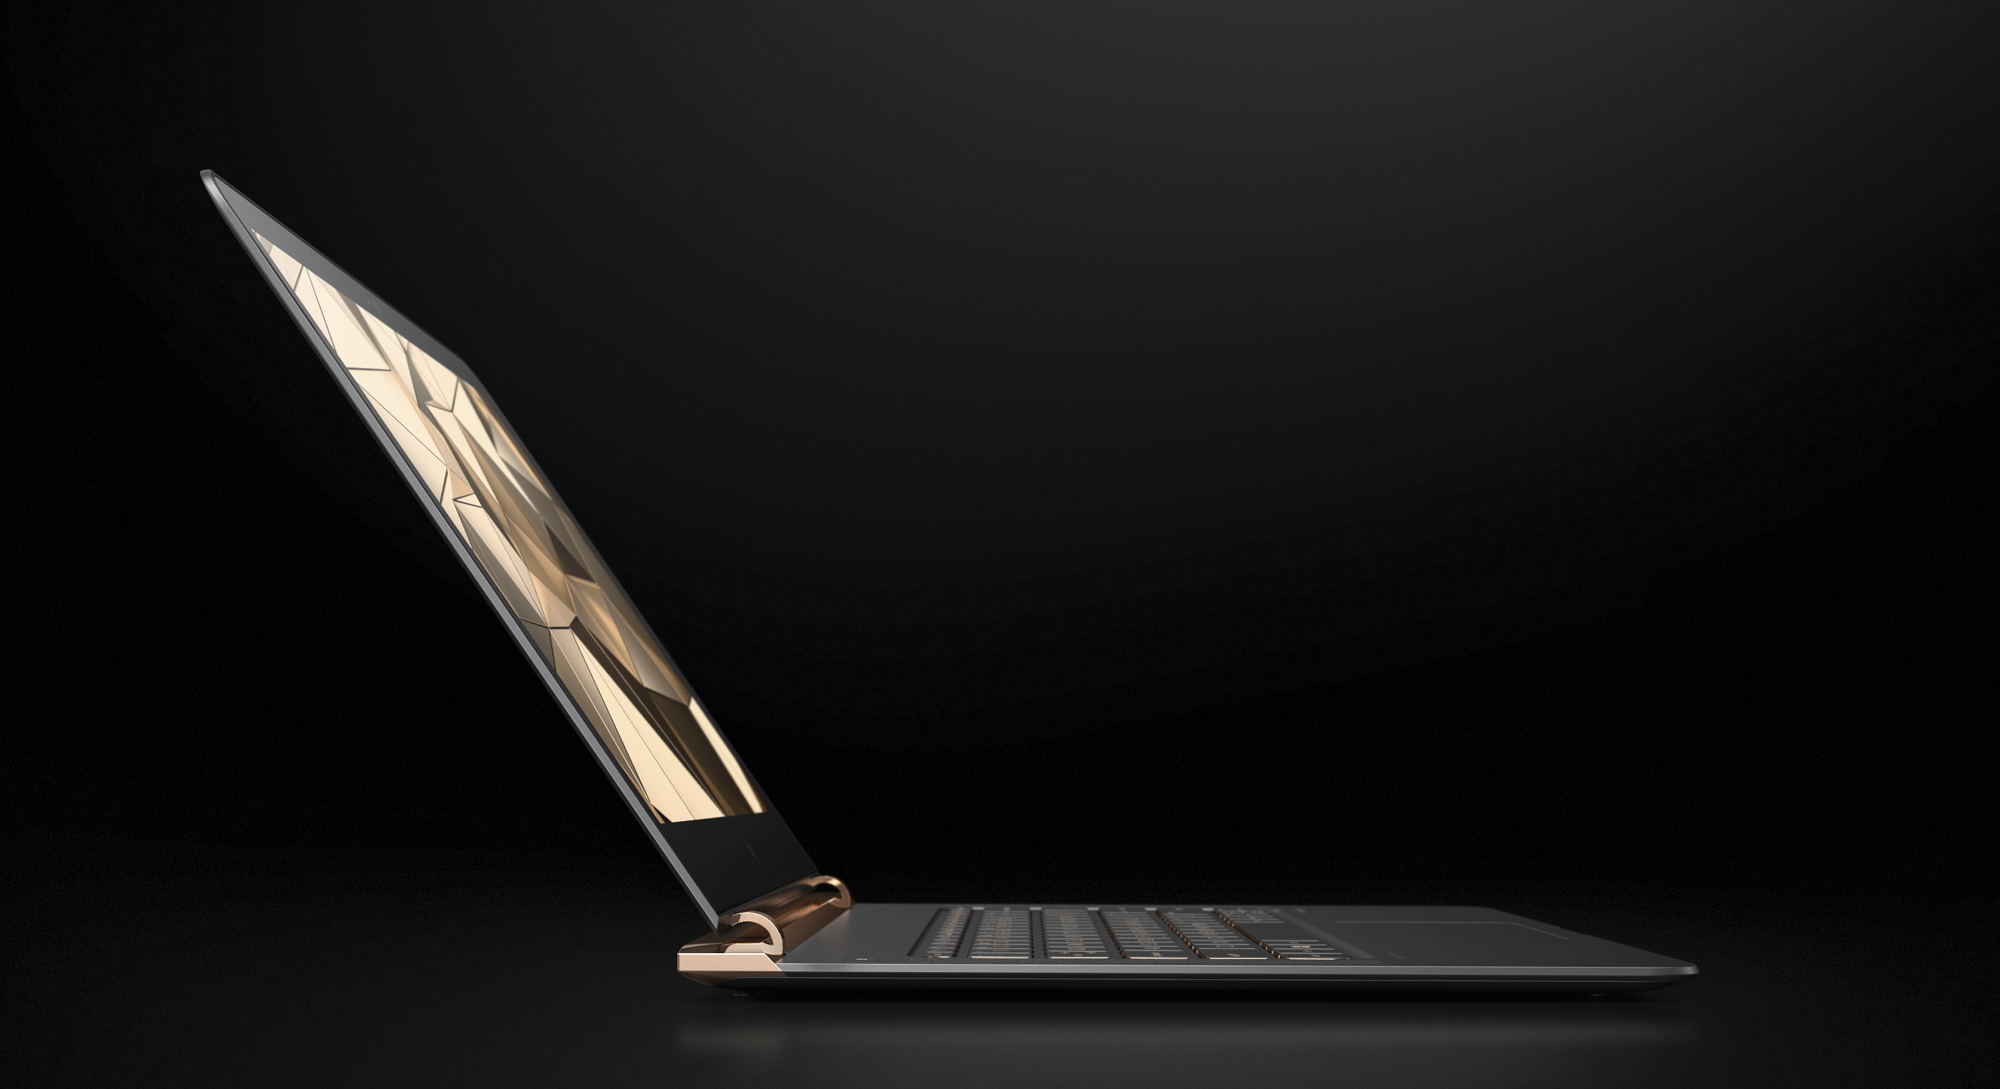 HP Spectre 13 Launched